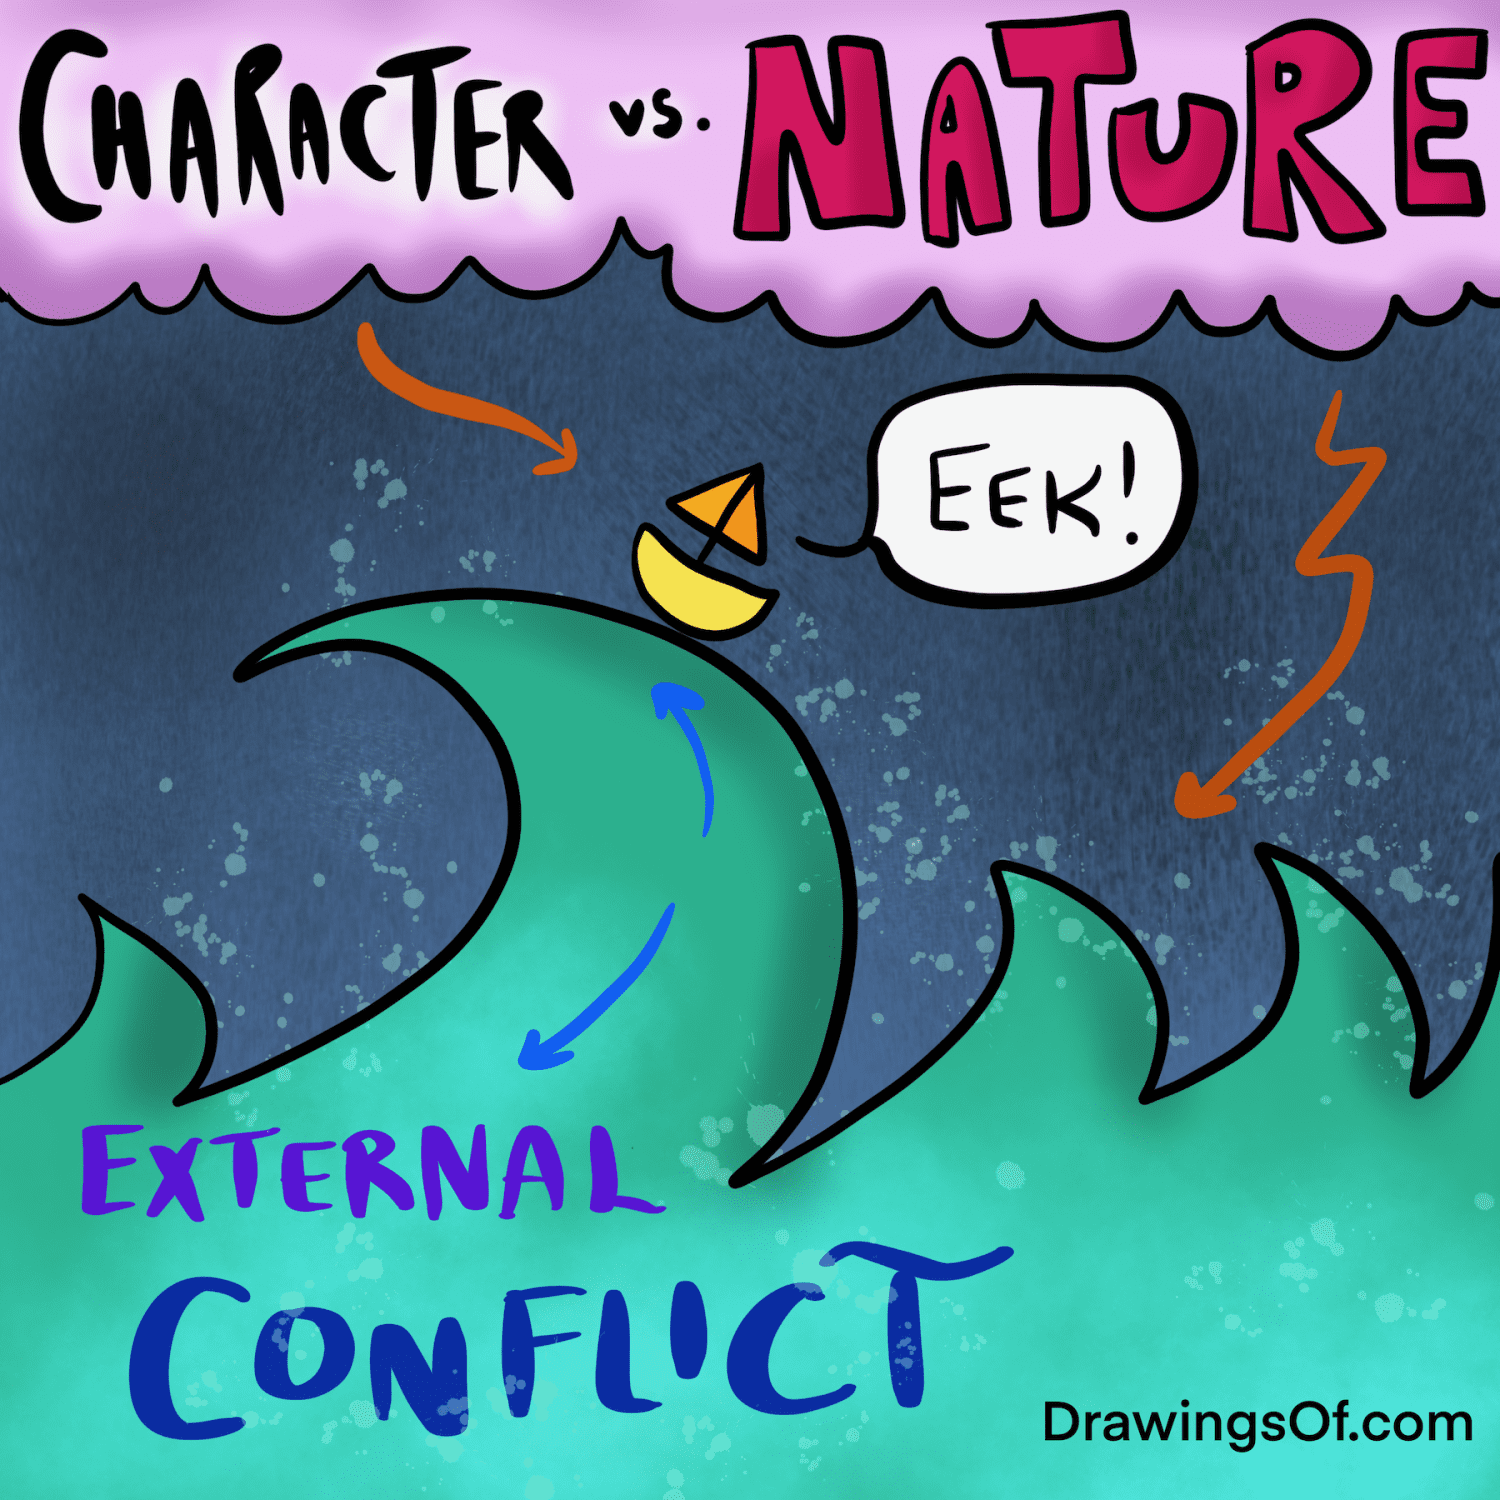 Types of conflict: vs. Nature